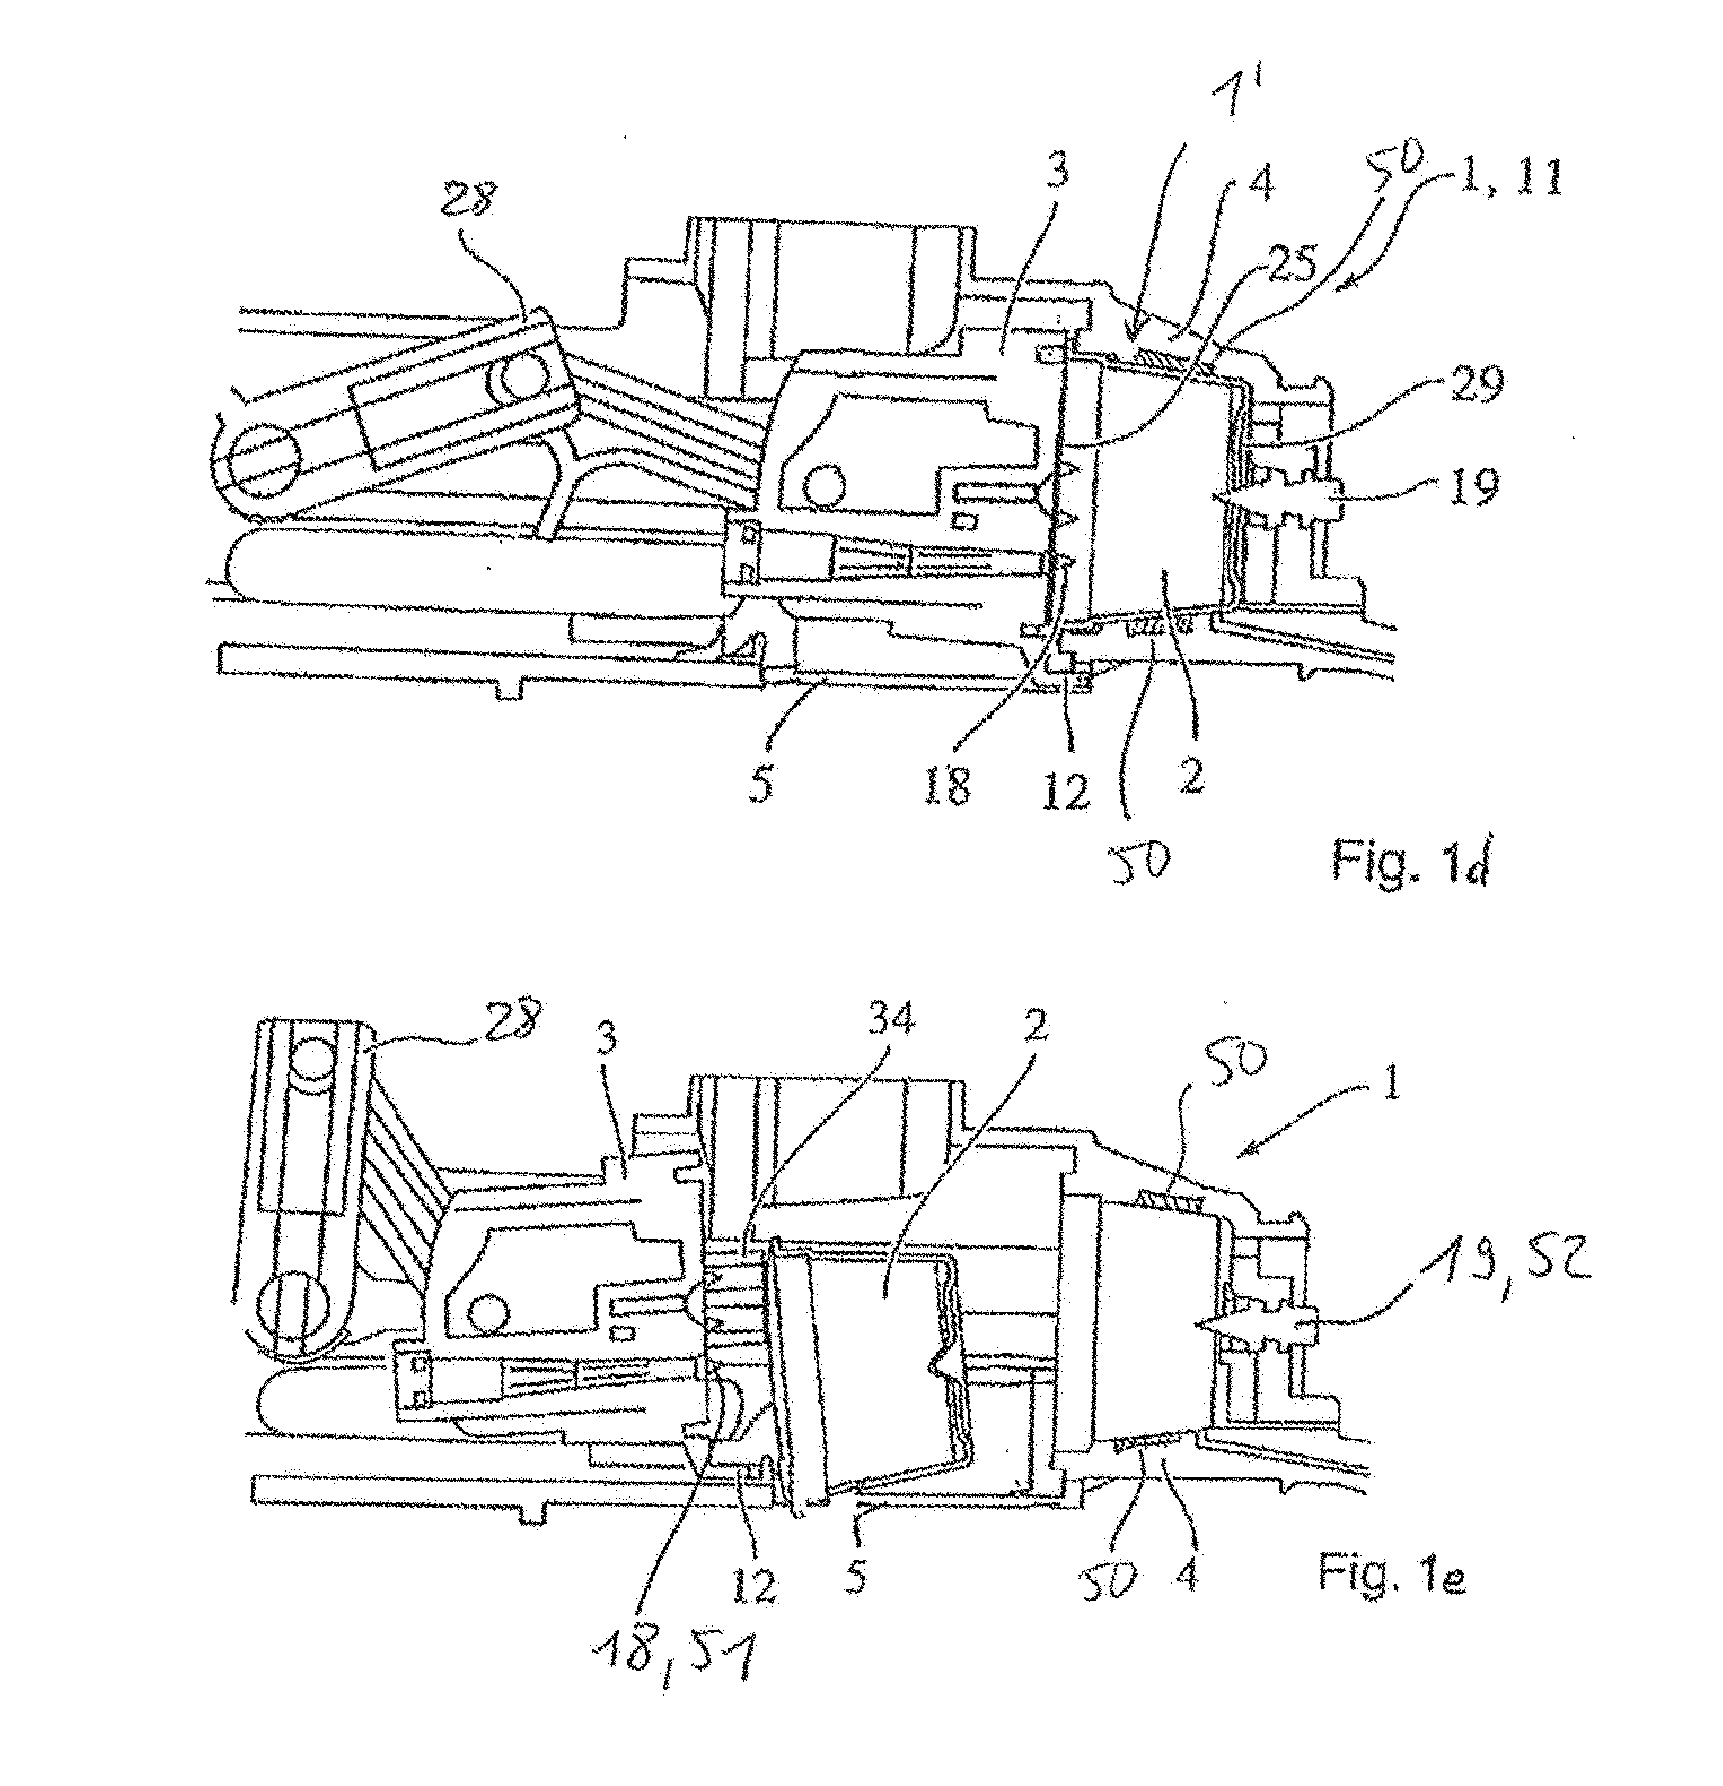 System and method for preparing a beverage